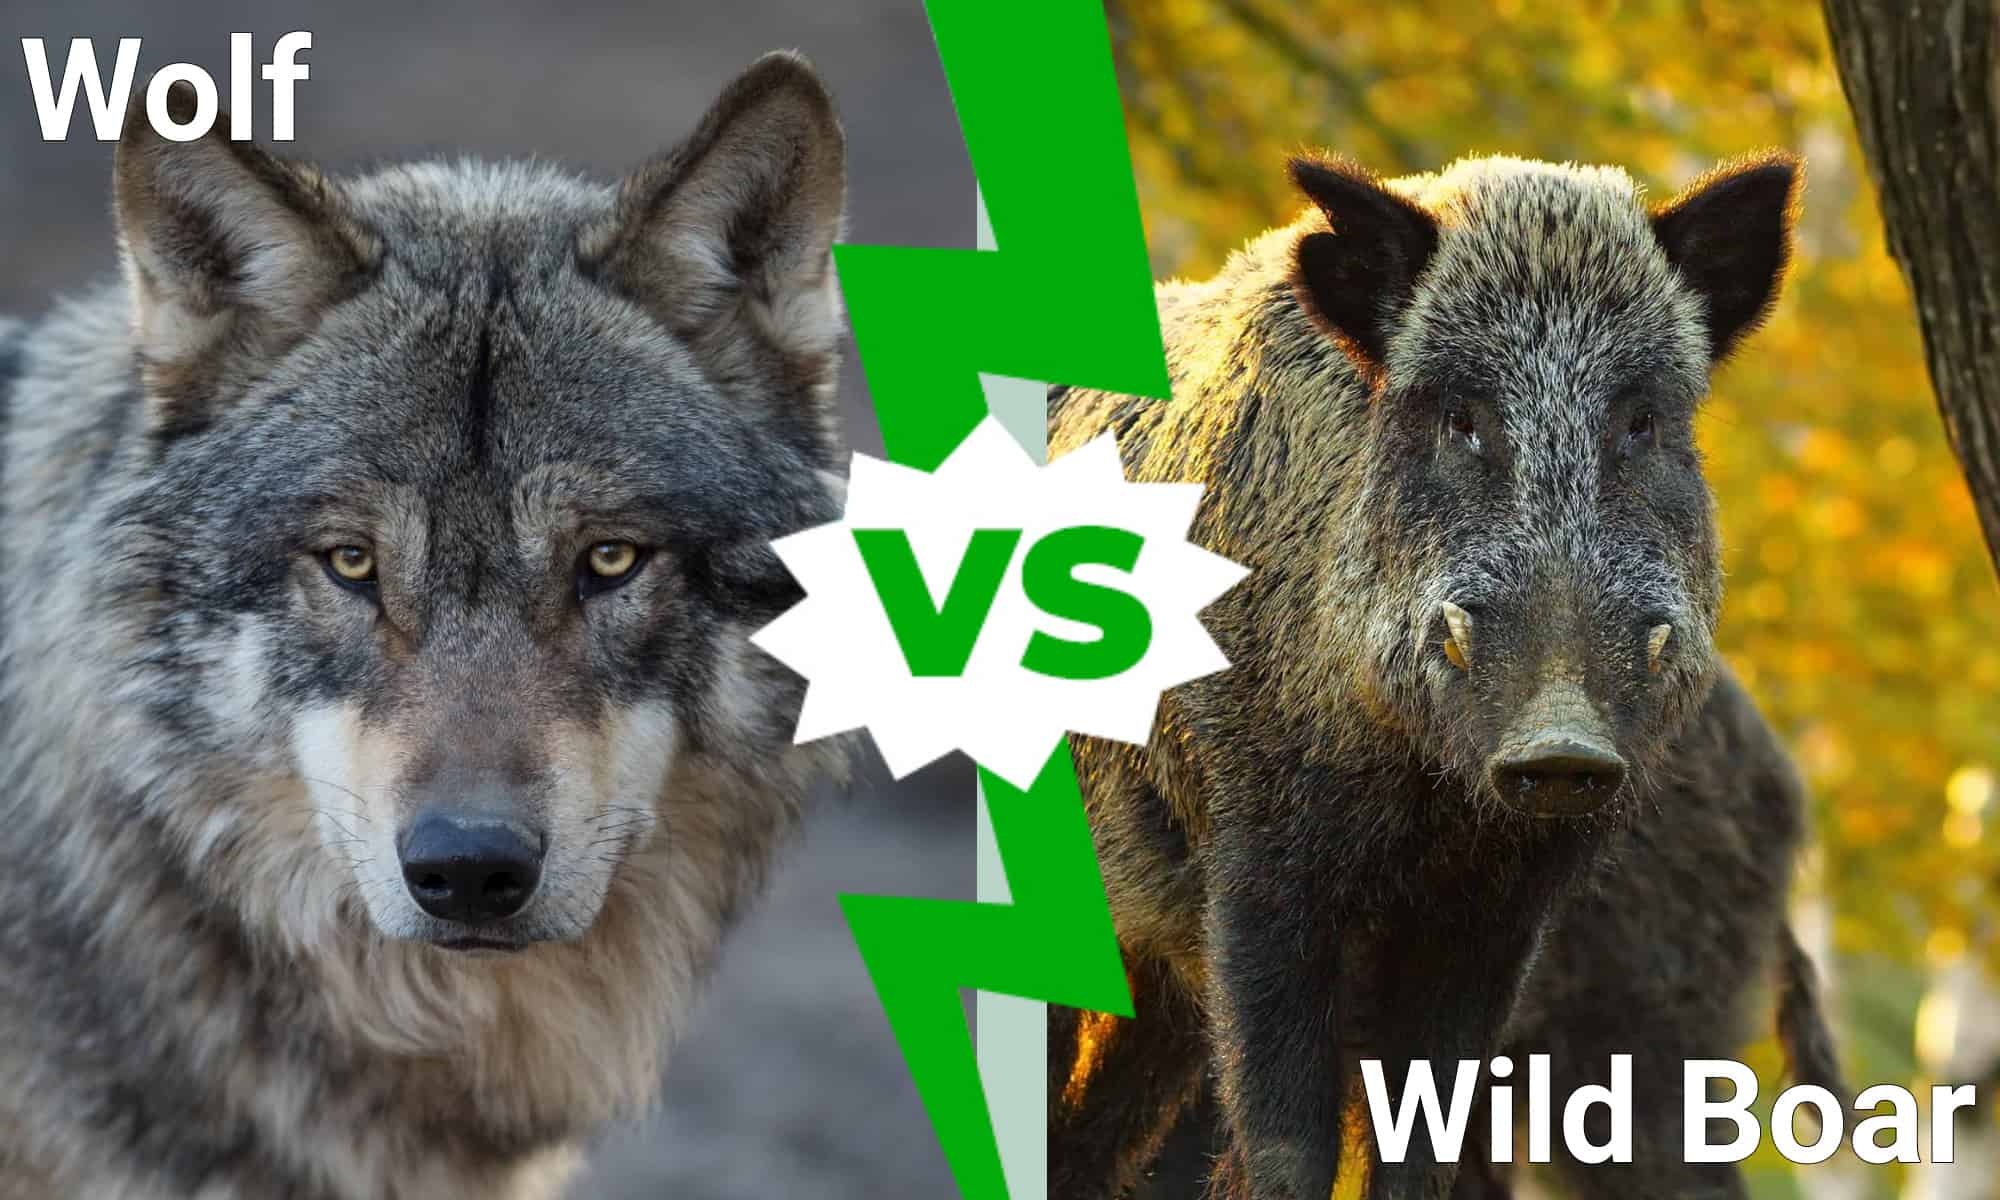 Wolf vs. Wild Boar: Which Animal Would Win a Fight?